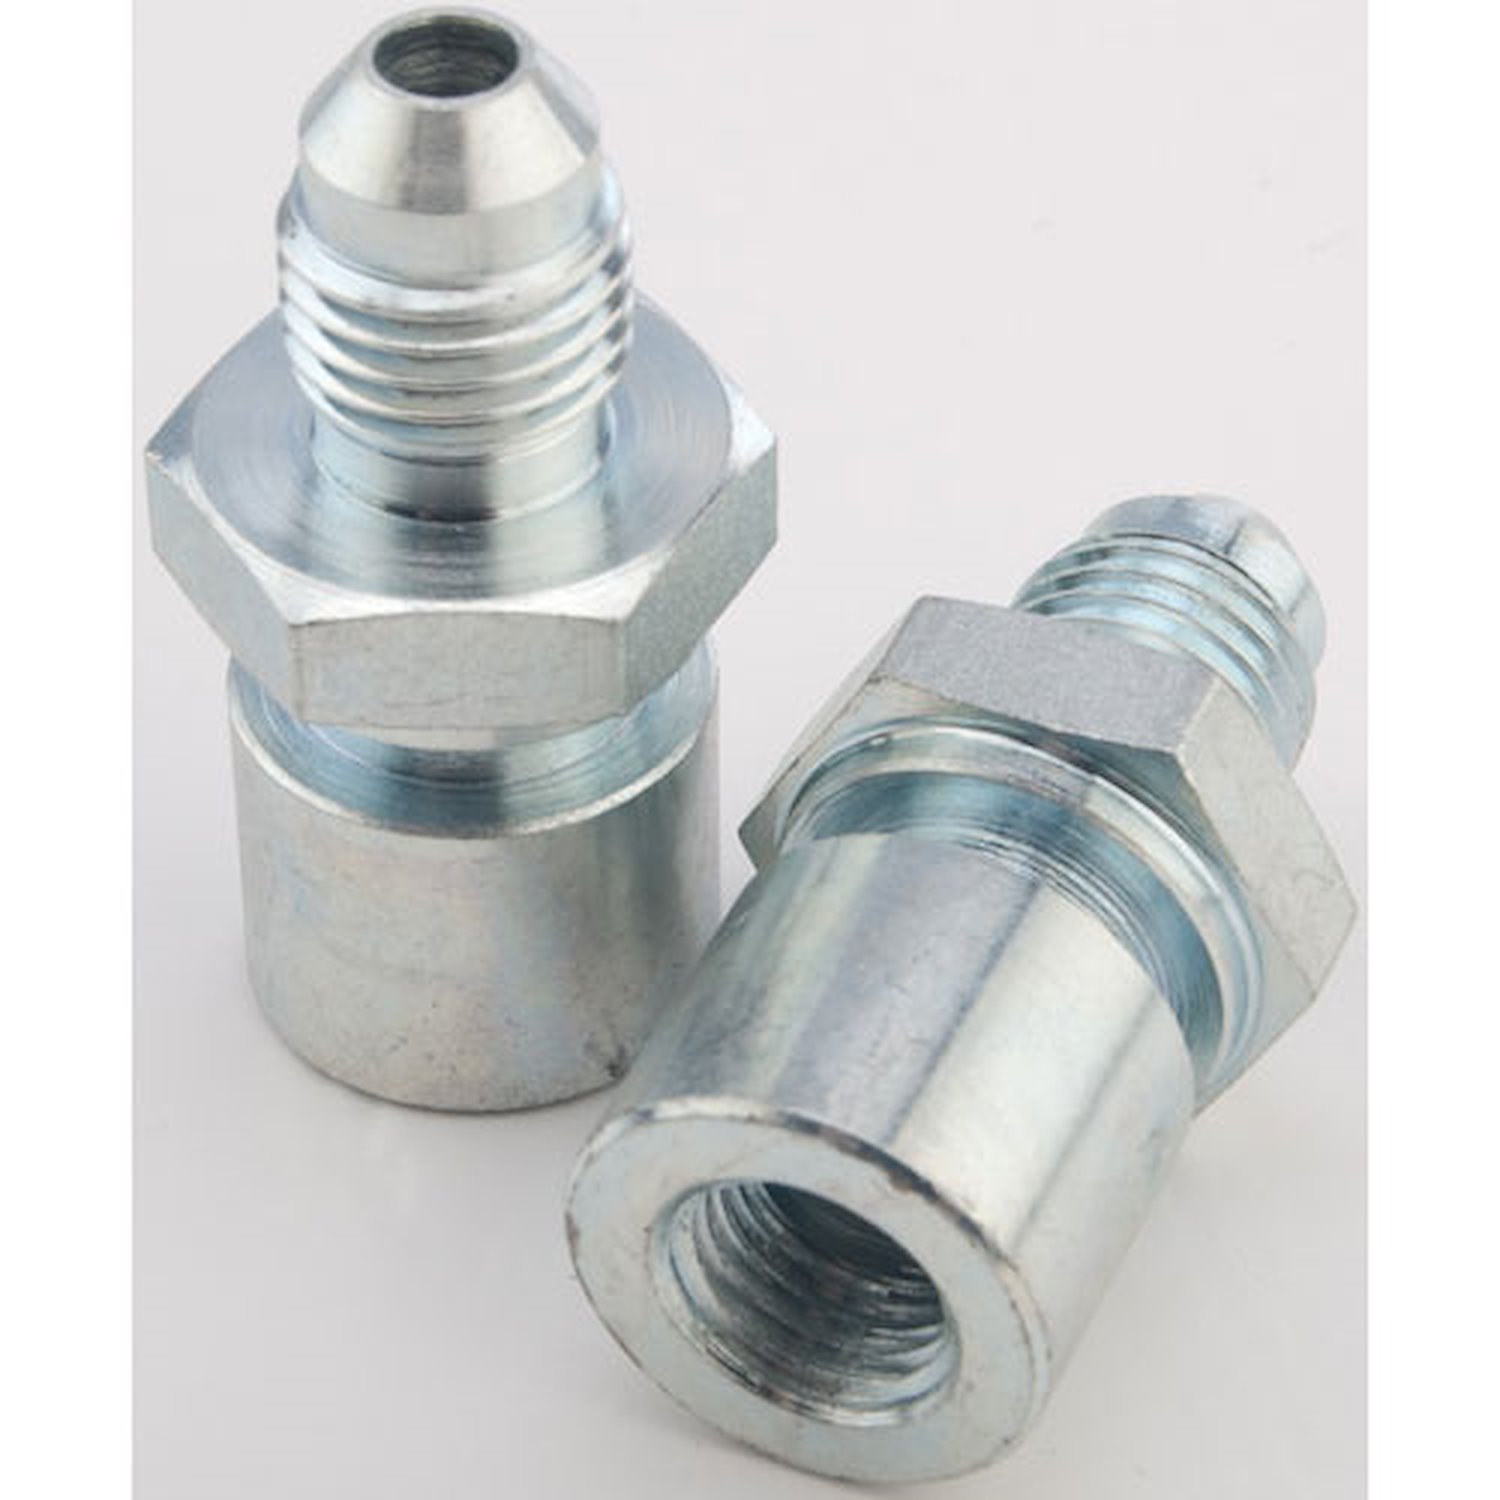 AN to Inverted Flare Female Tube Adapter Fittings [-4 AN x 3/8 in.-24 Inverted Flare]